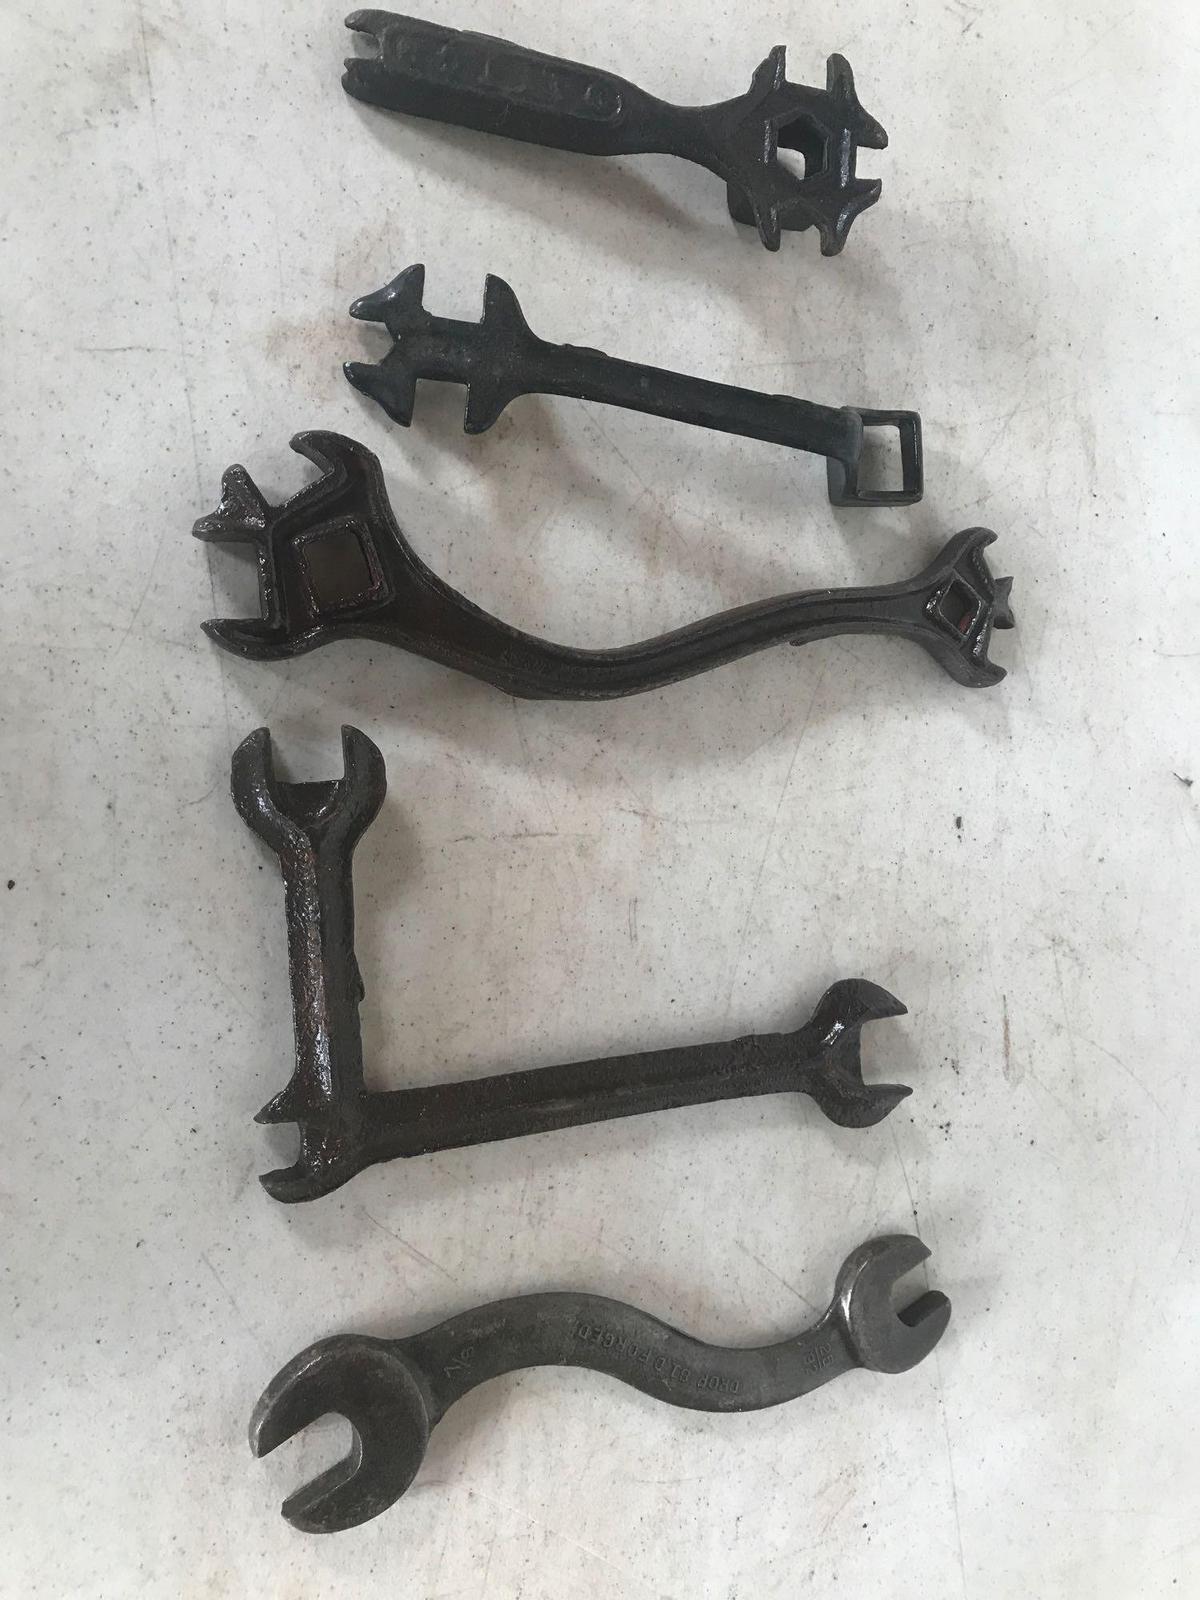 5 wrenches, 1 is a Dayton